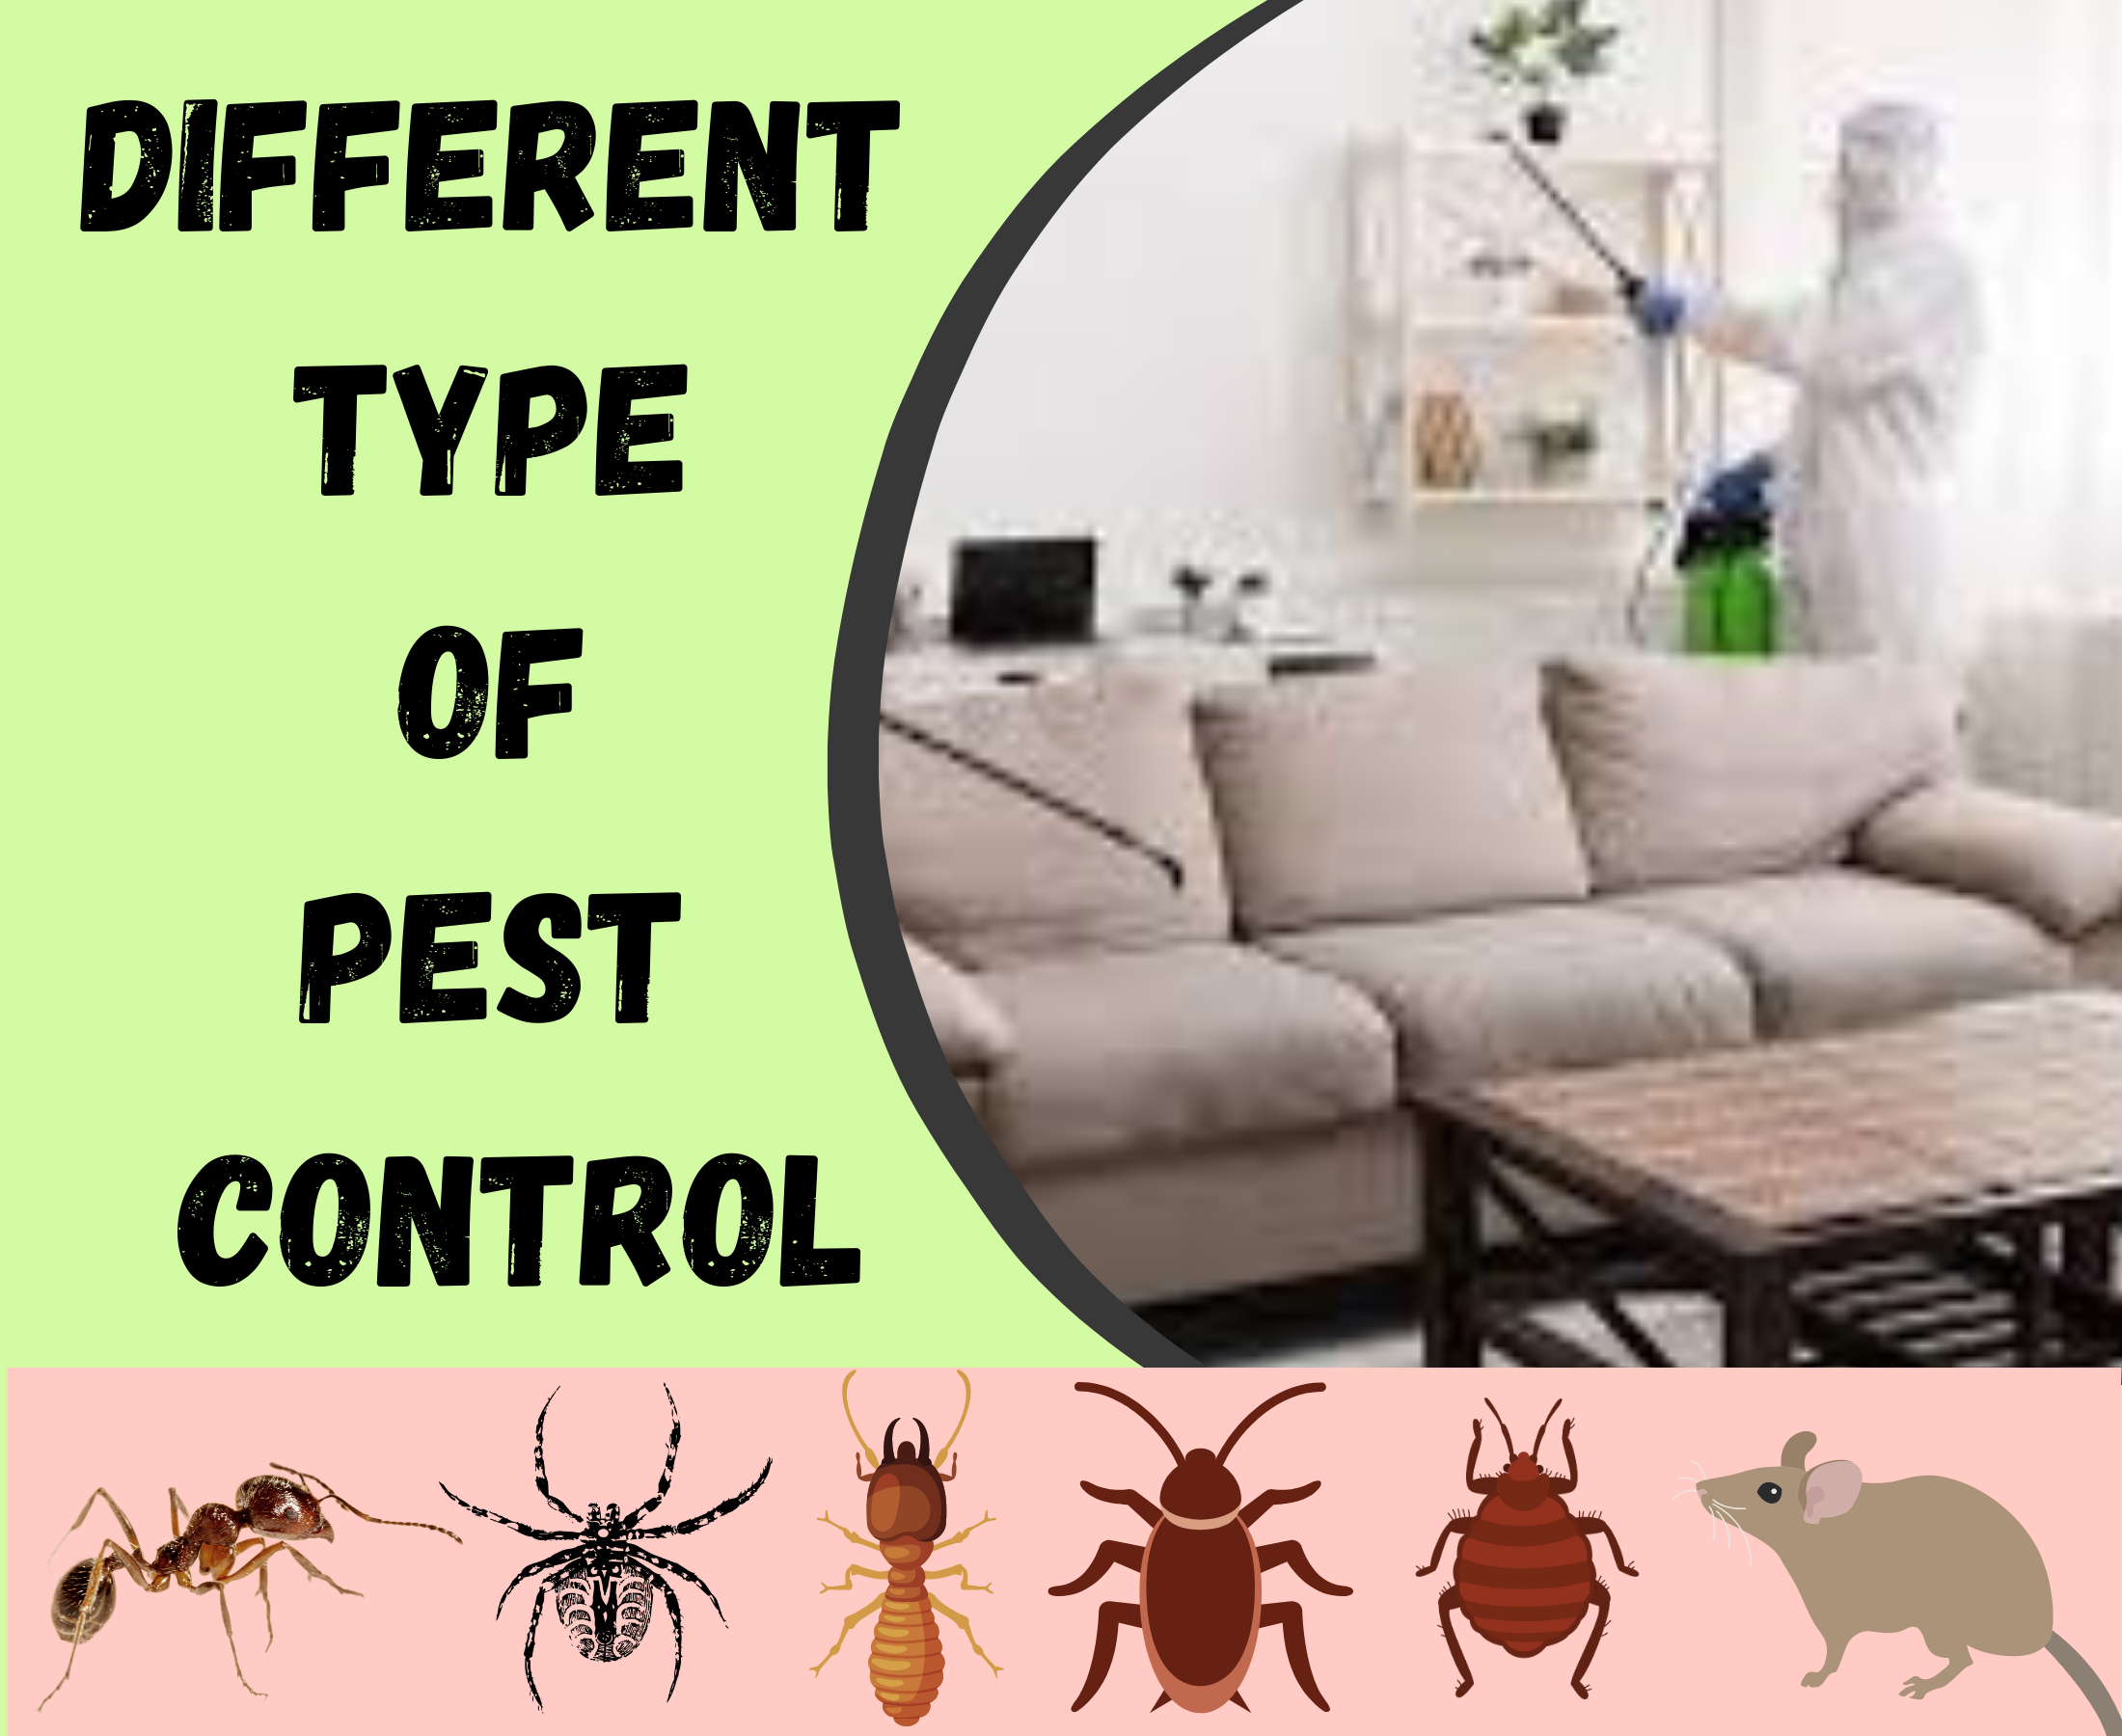 What type of pest control is best?